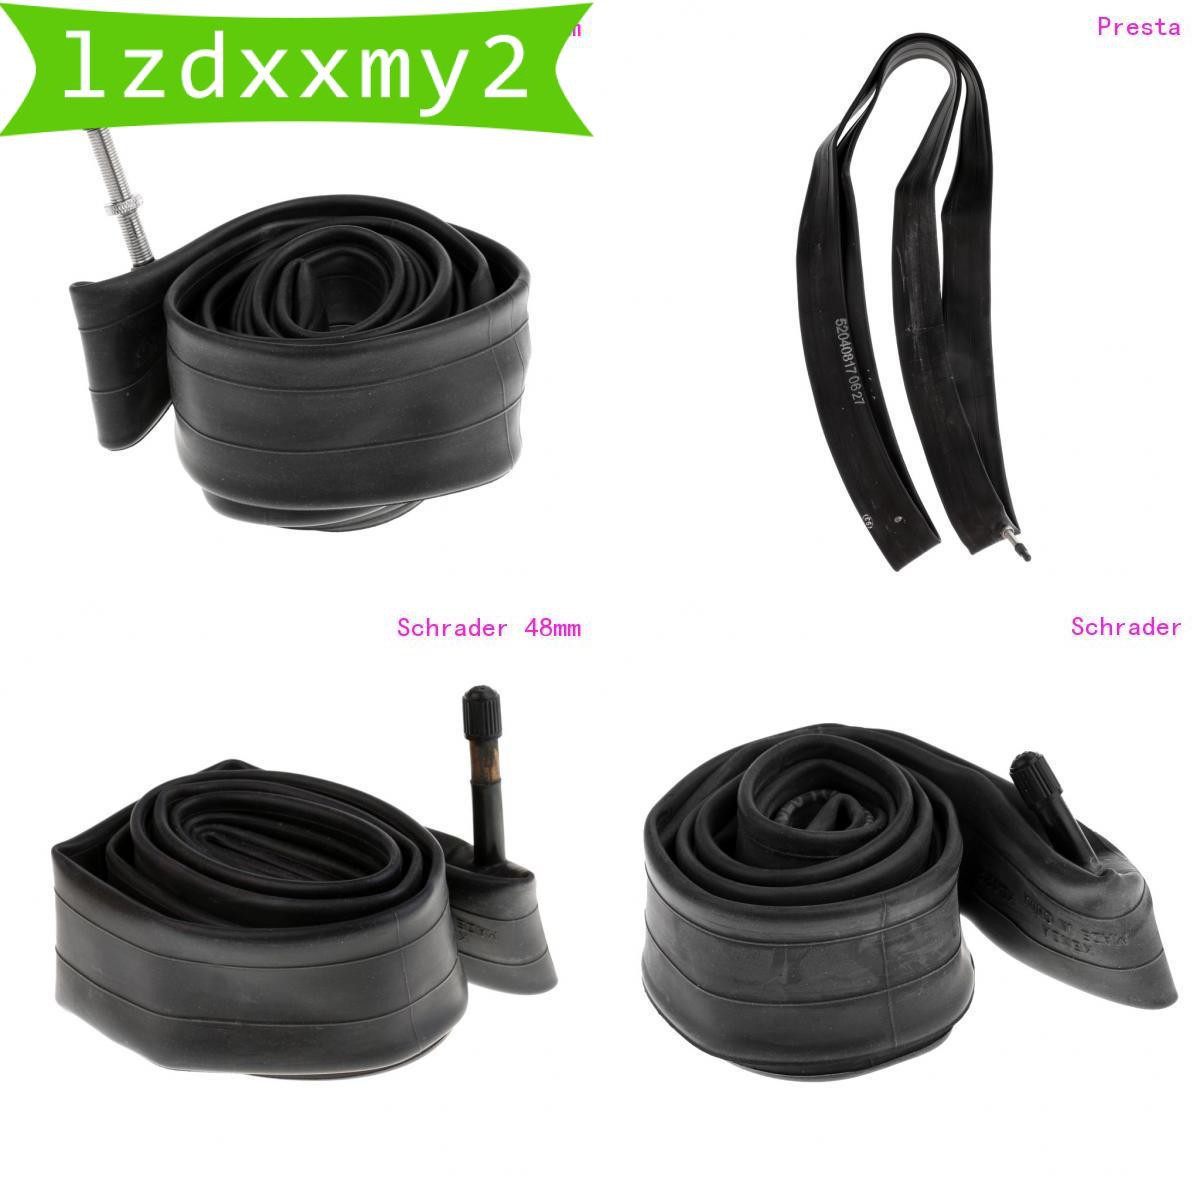 Presta Valve 27.5/" X 1.5//1.75 Bicycle Bike Cycle Inner Tube with Schrader